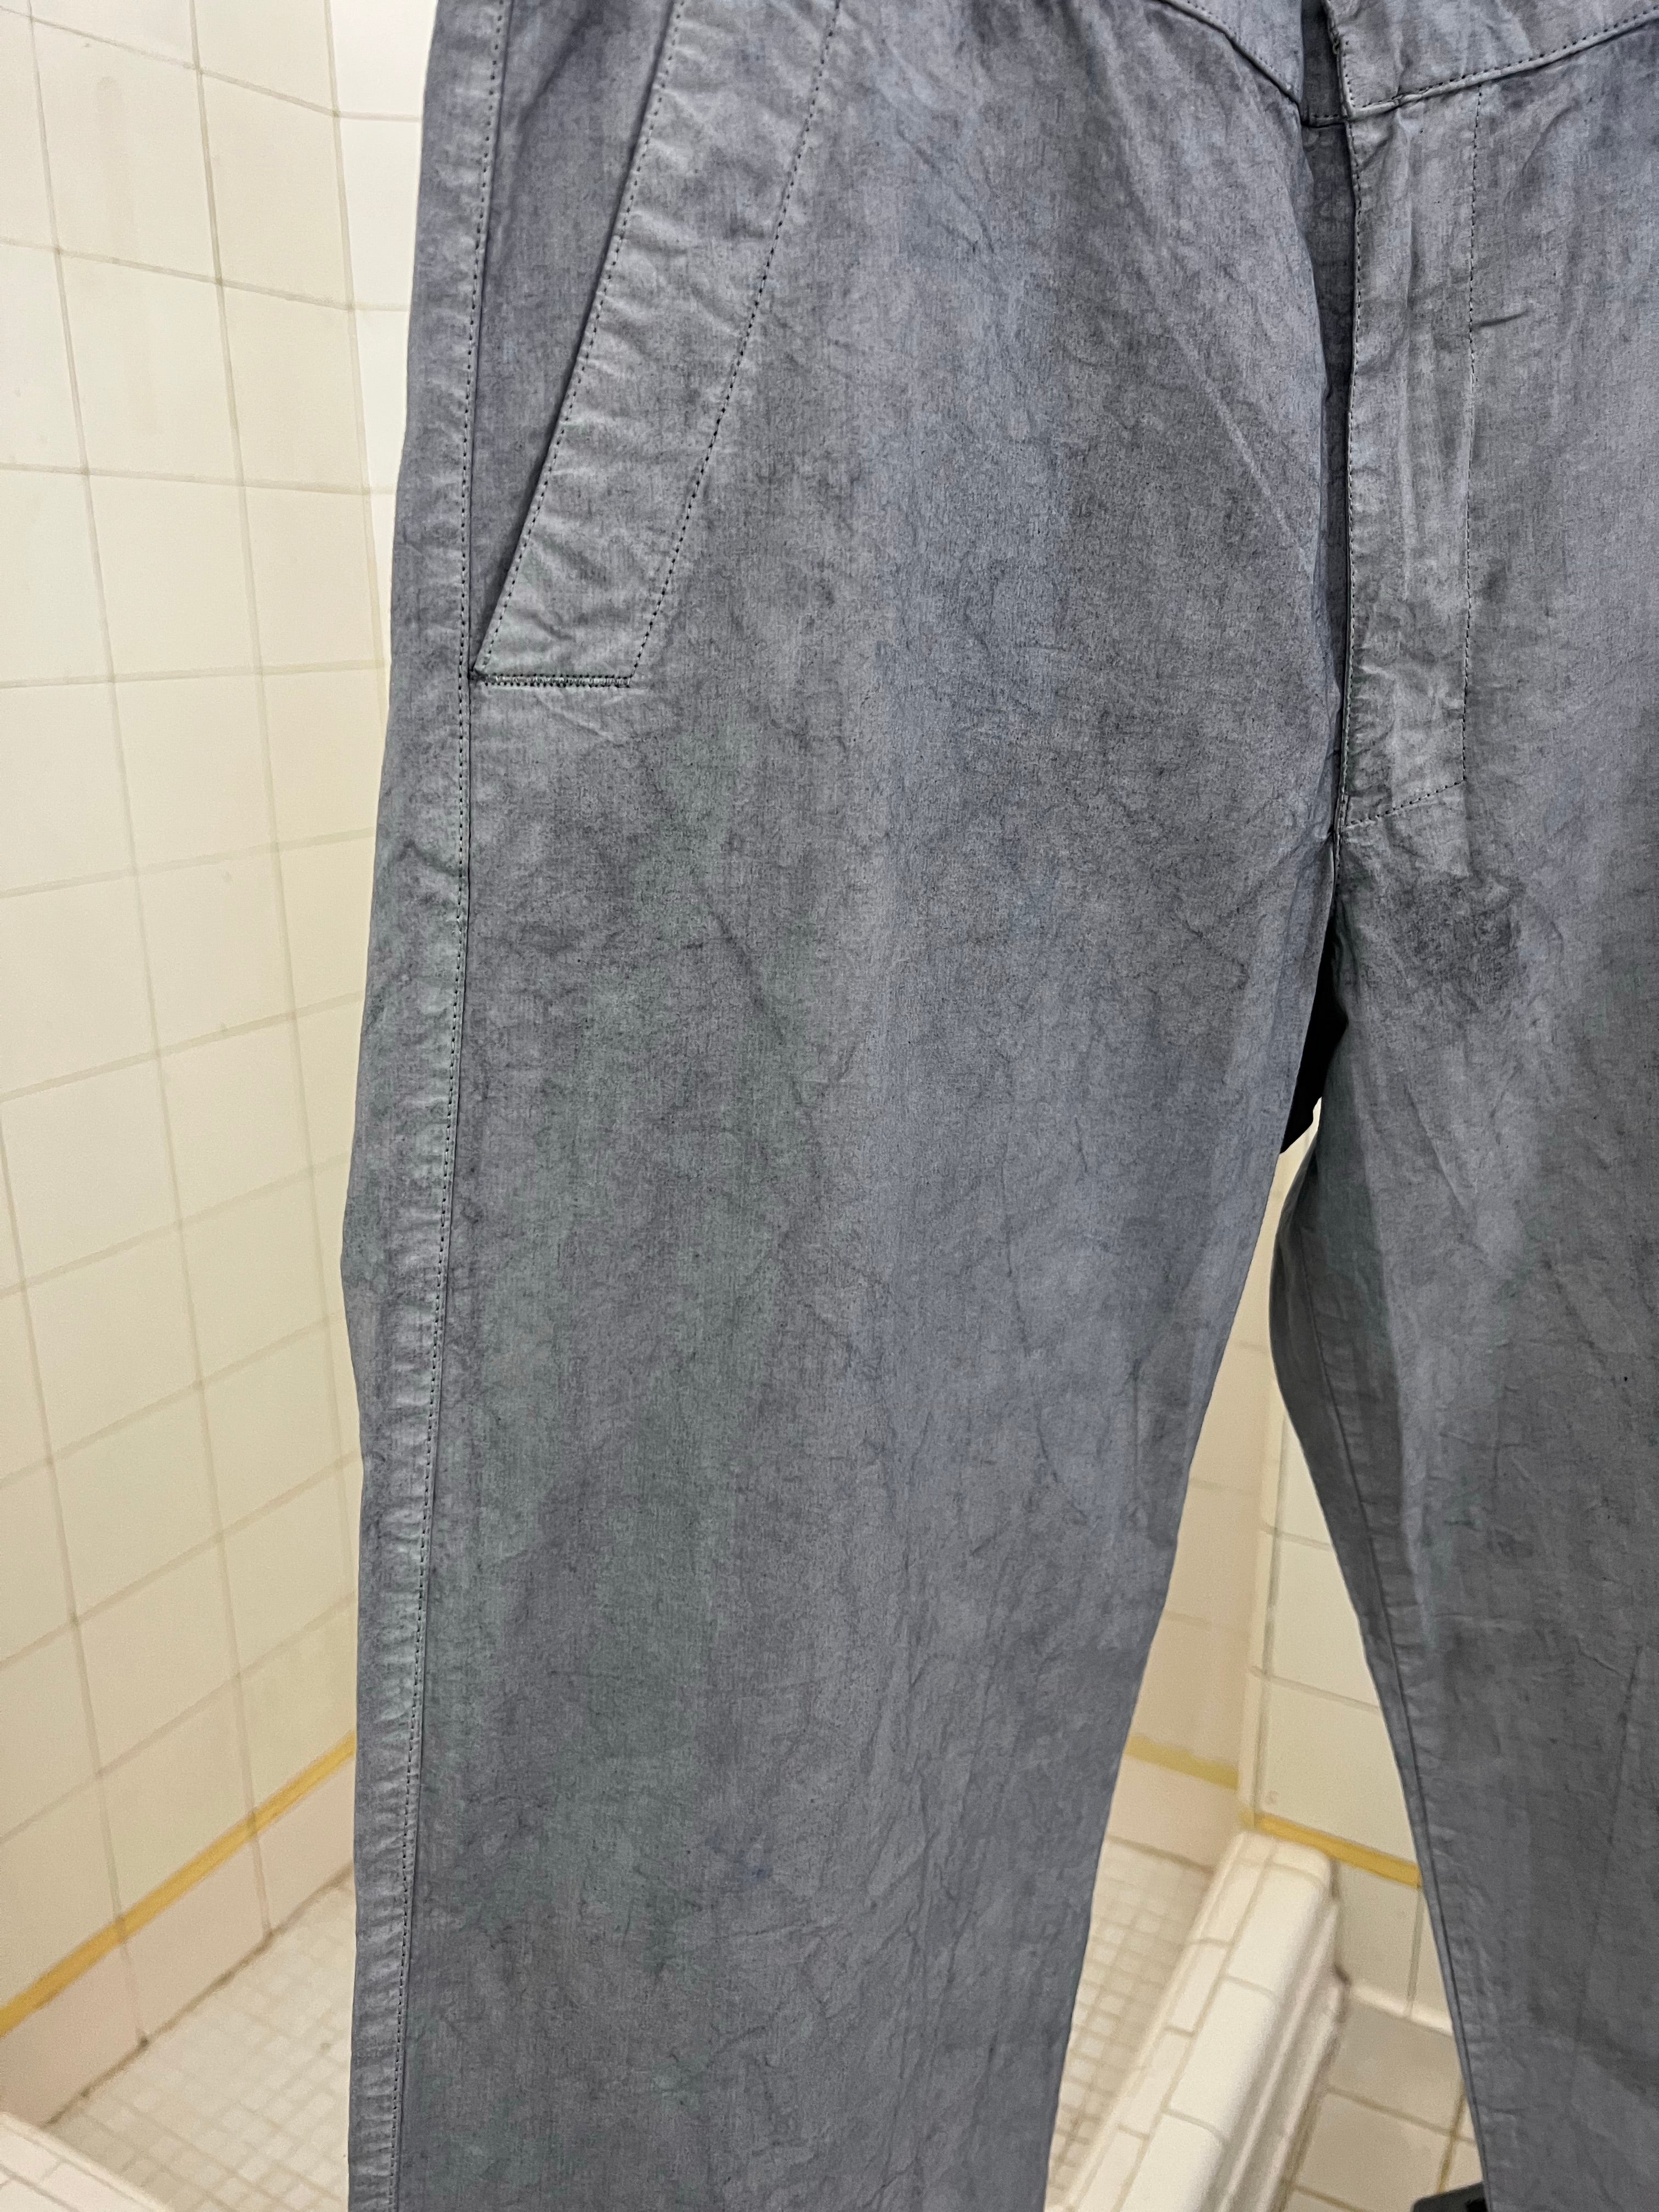 2000s Mandarina Duck Overdyed Trousers with Back Pocket Zipper Detail - Size L